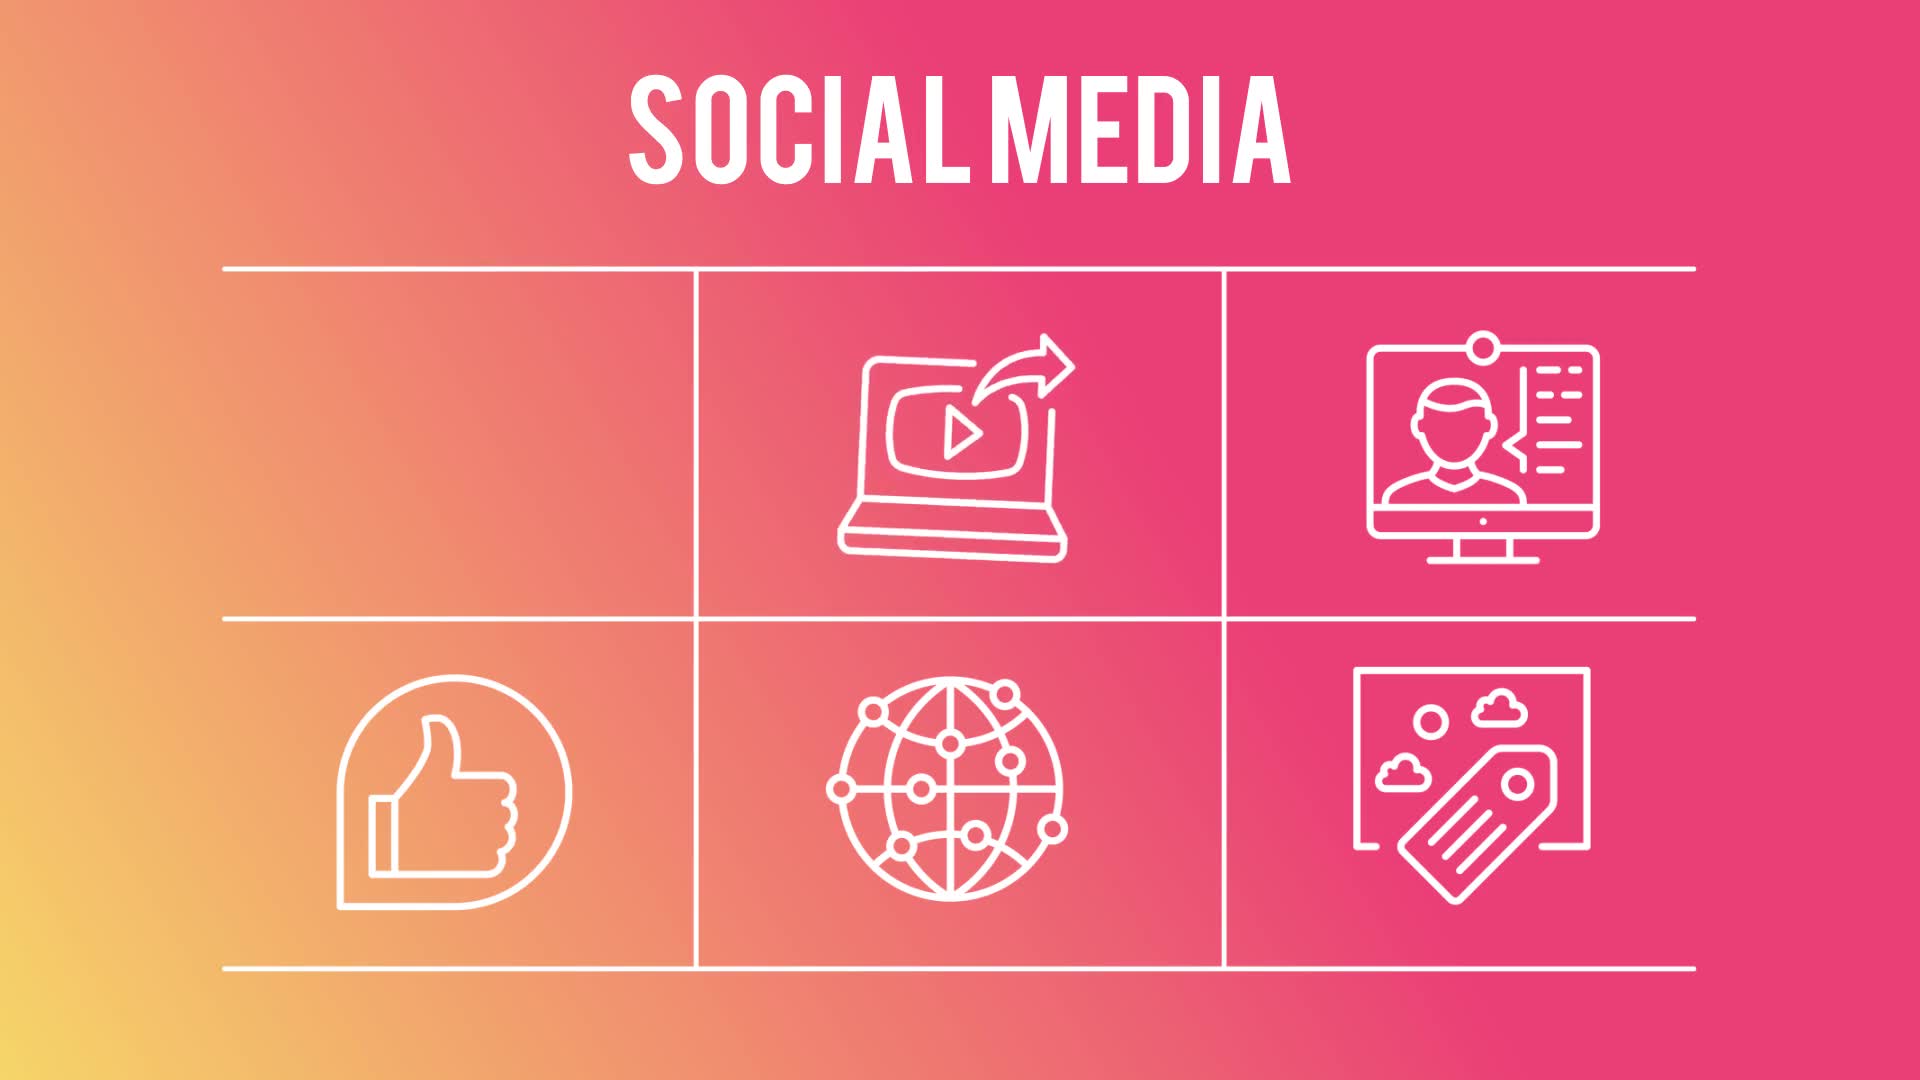 Social Media 50 Thin Line Icons - Download Videohive 23172157